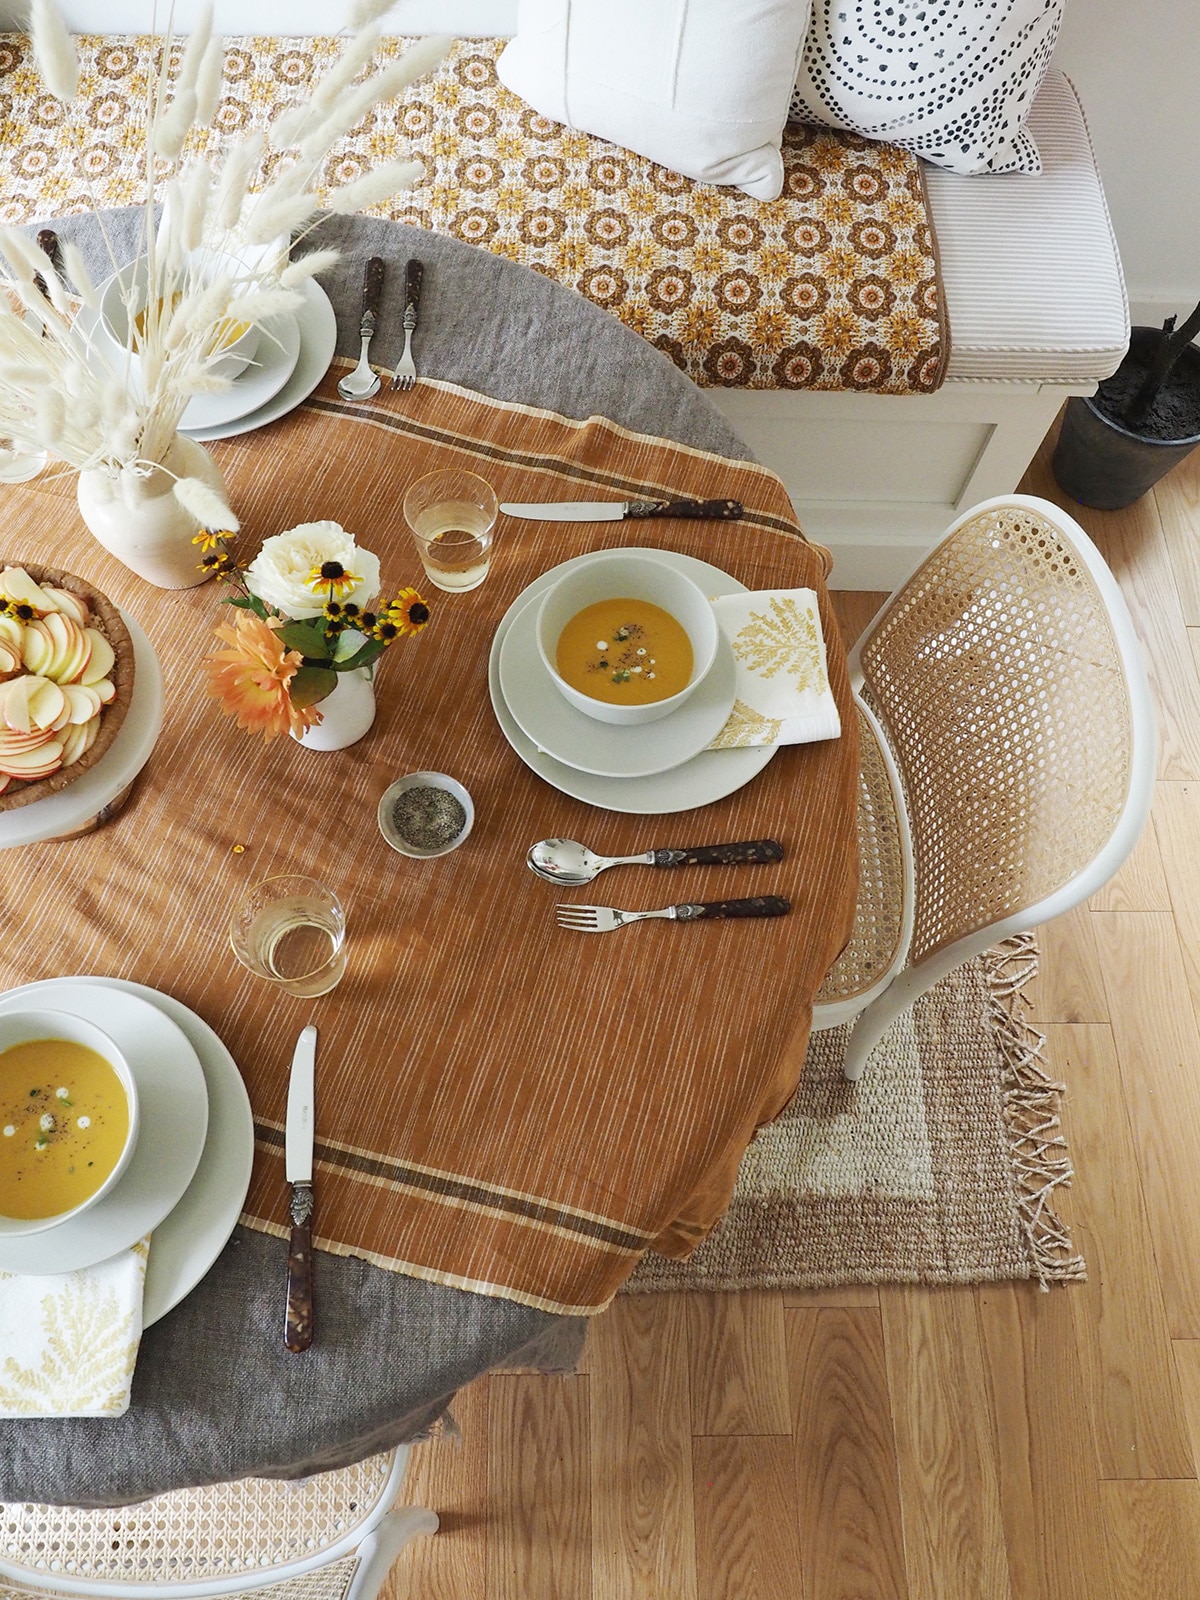 layered-textiles-make-a-cozy-setting-for-a-fall-harvest-table-coco-kelley